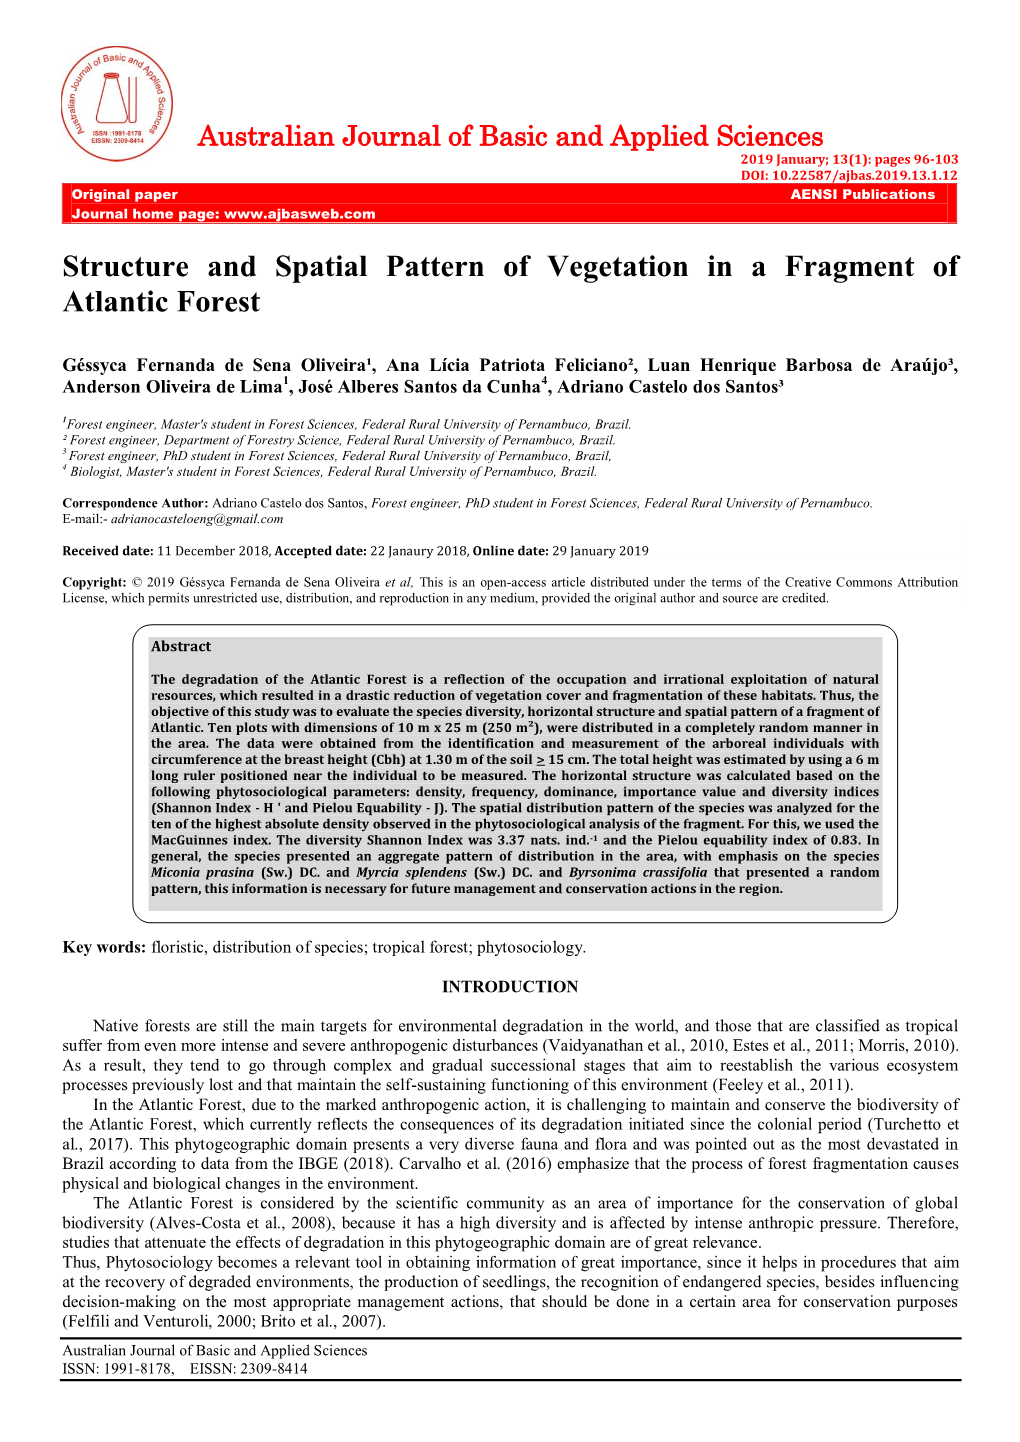 Structure and Spatial Pattern of Vegetation in a Fragment of Atlantic Forest